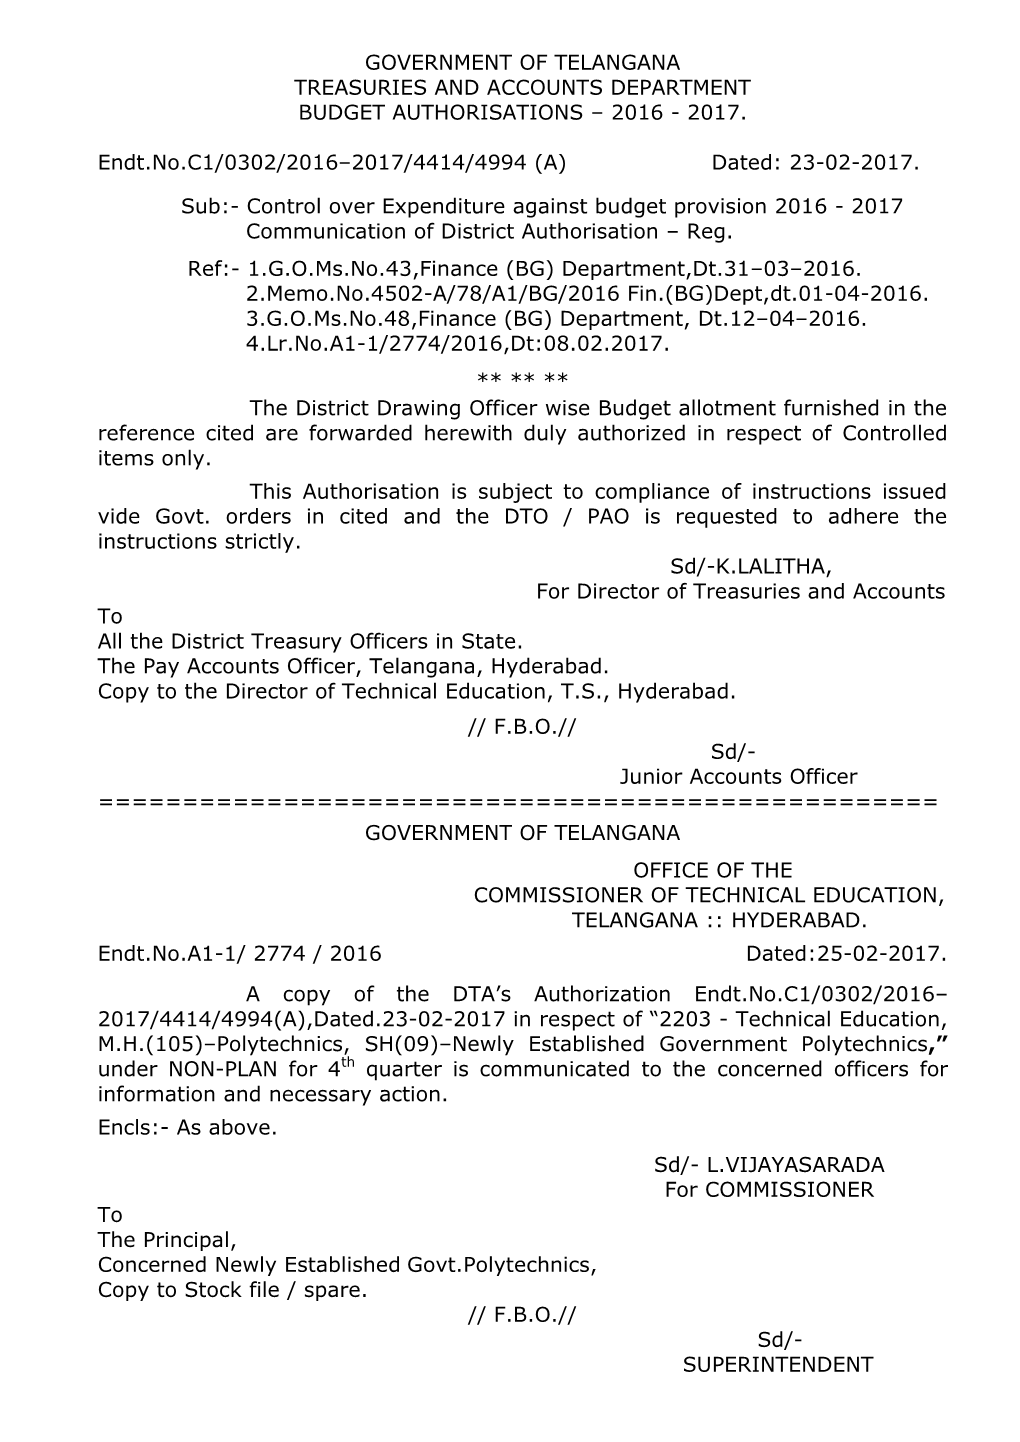 Government of Telangana Treasuries and Accounts Department Budget Authorisations – 2016 - 2017